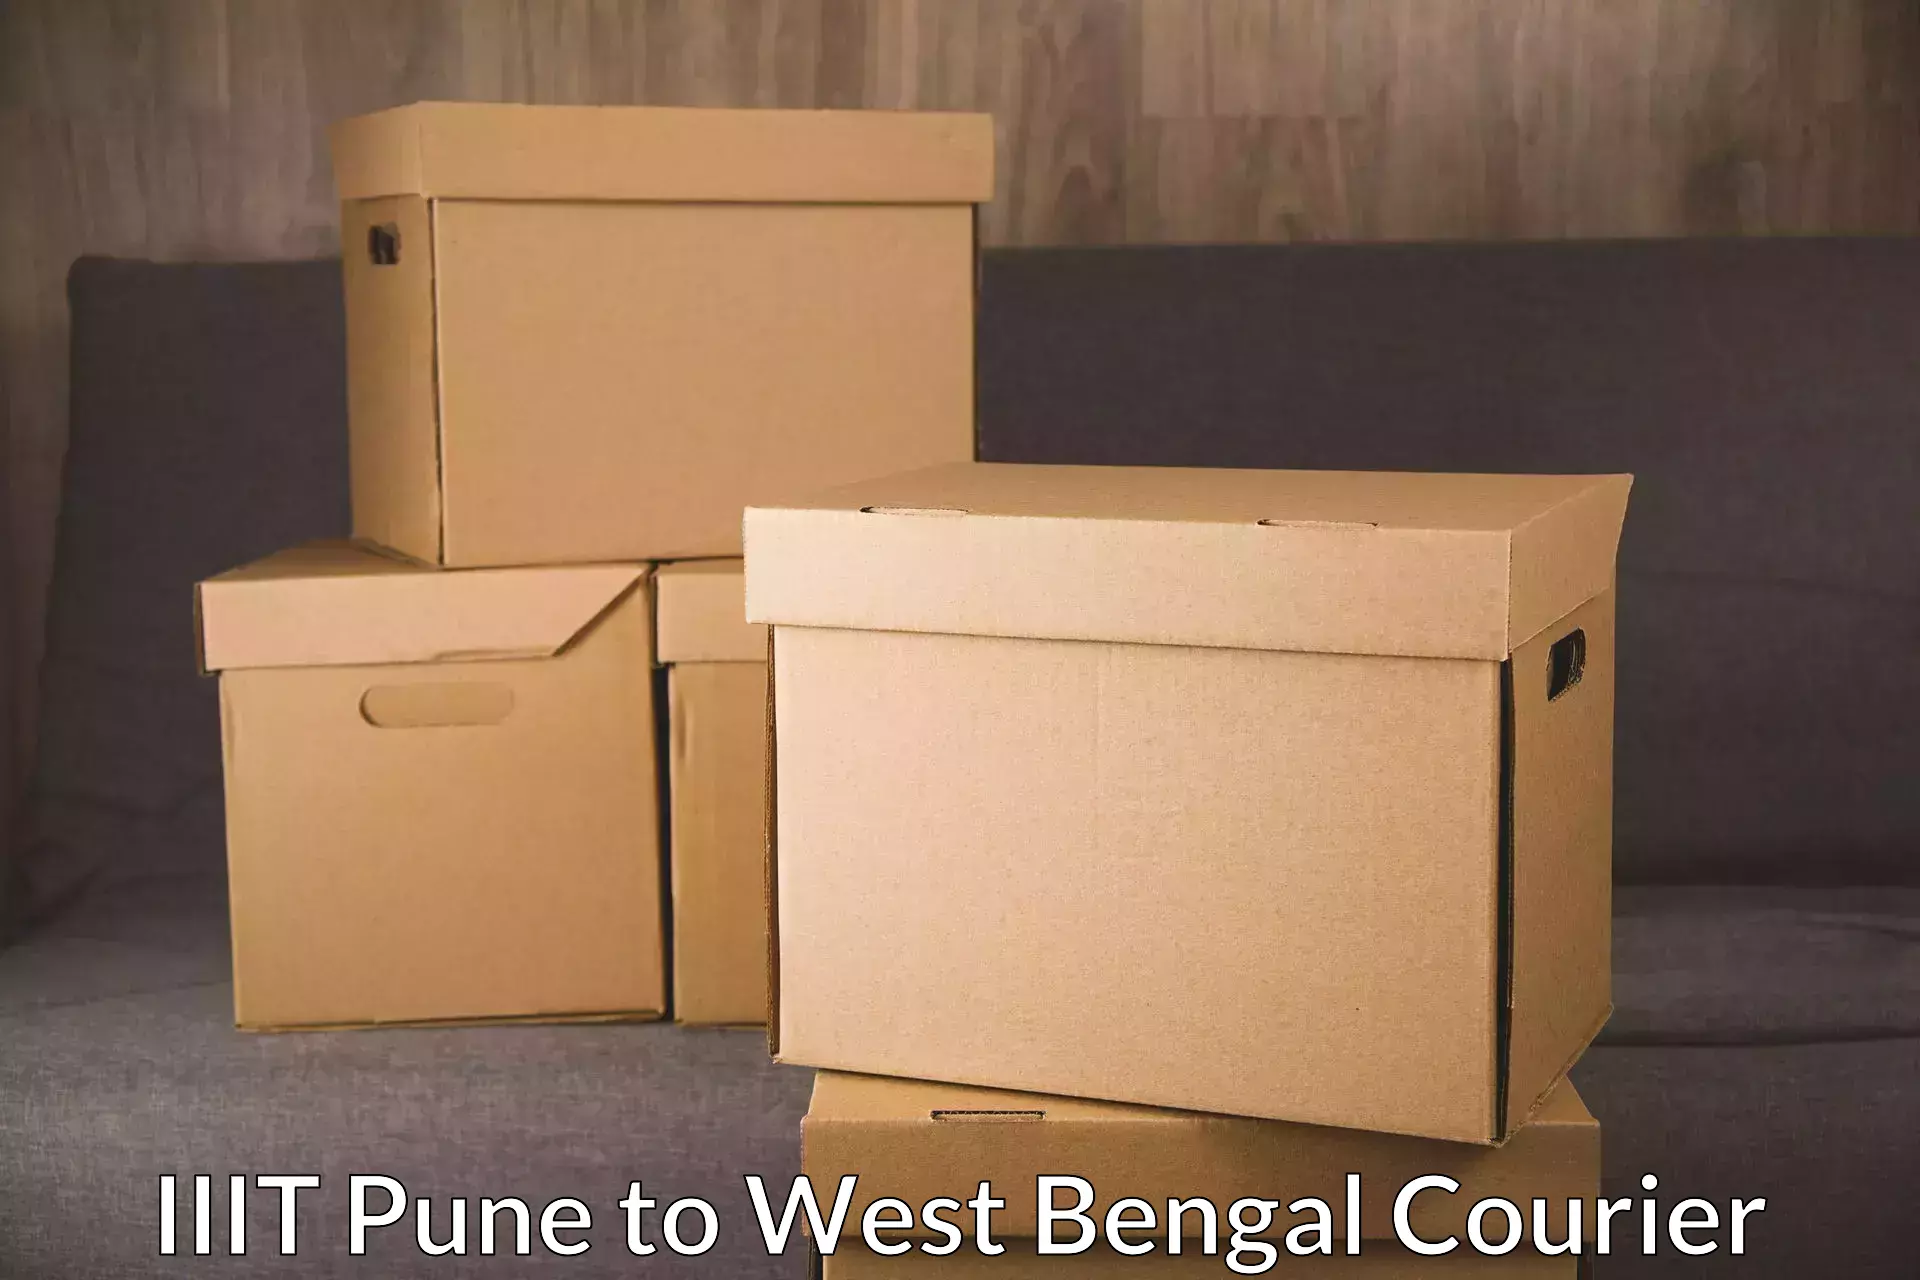 Courier service partnerships IIIT Pune to West Bengal